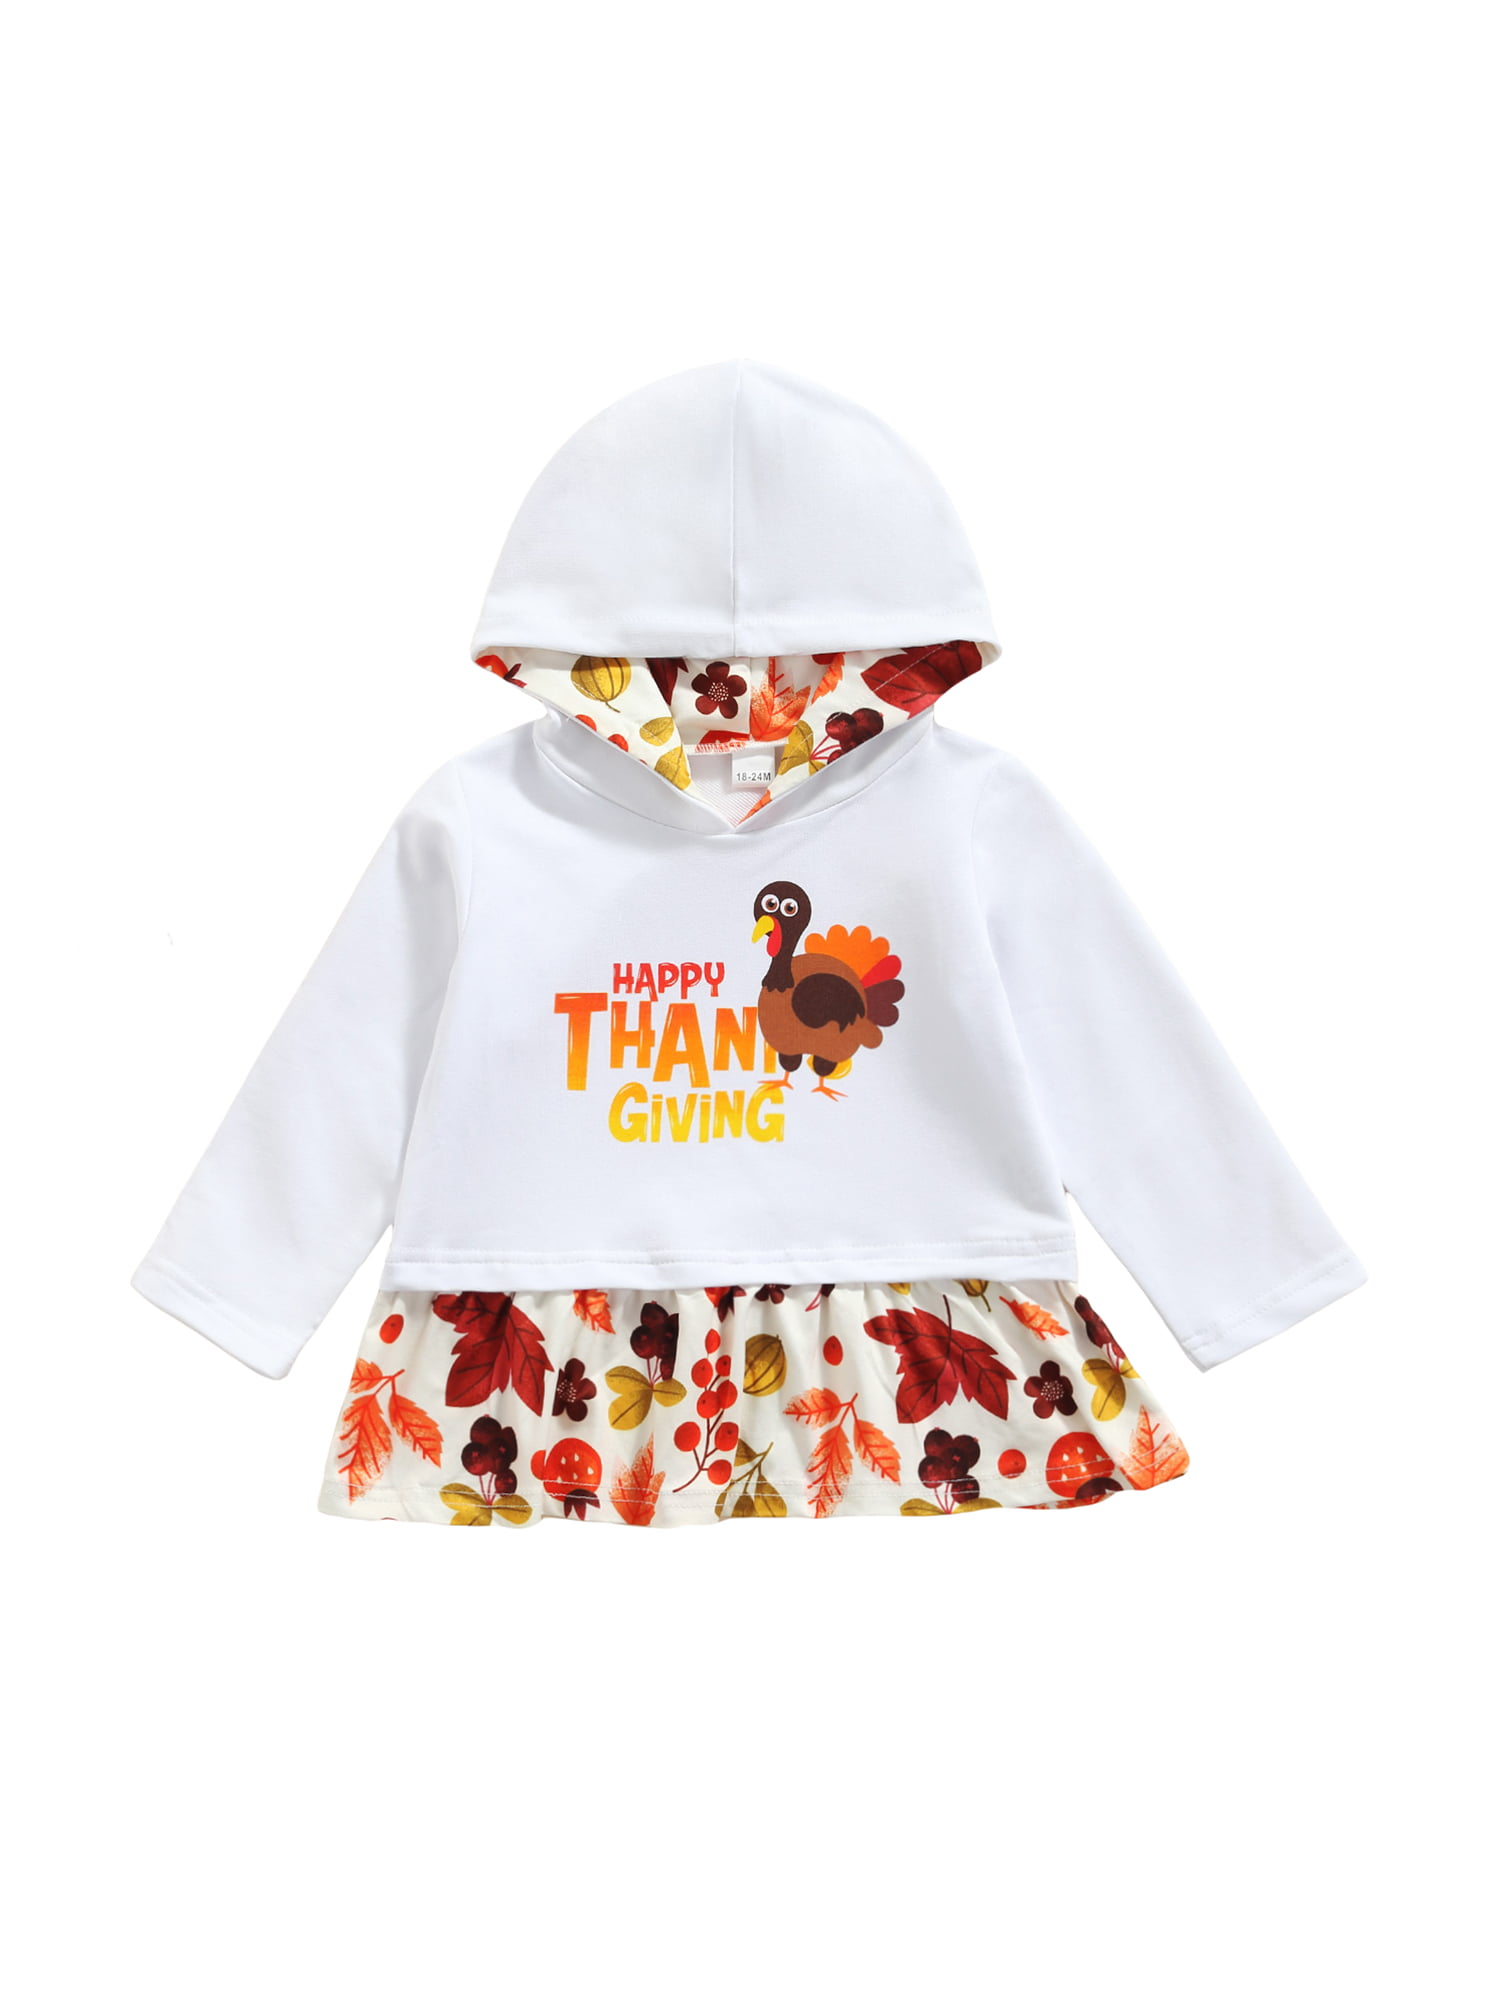 Thanksgiving Day Turkey Womens Long Sleeve Pullover Hooded Sweatshirt Top Hoodie with Fleece Lining 